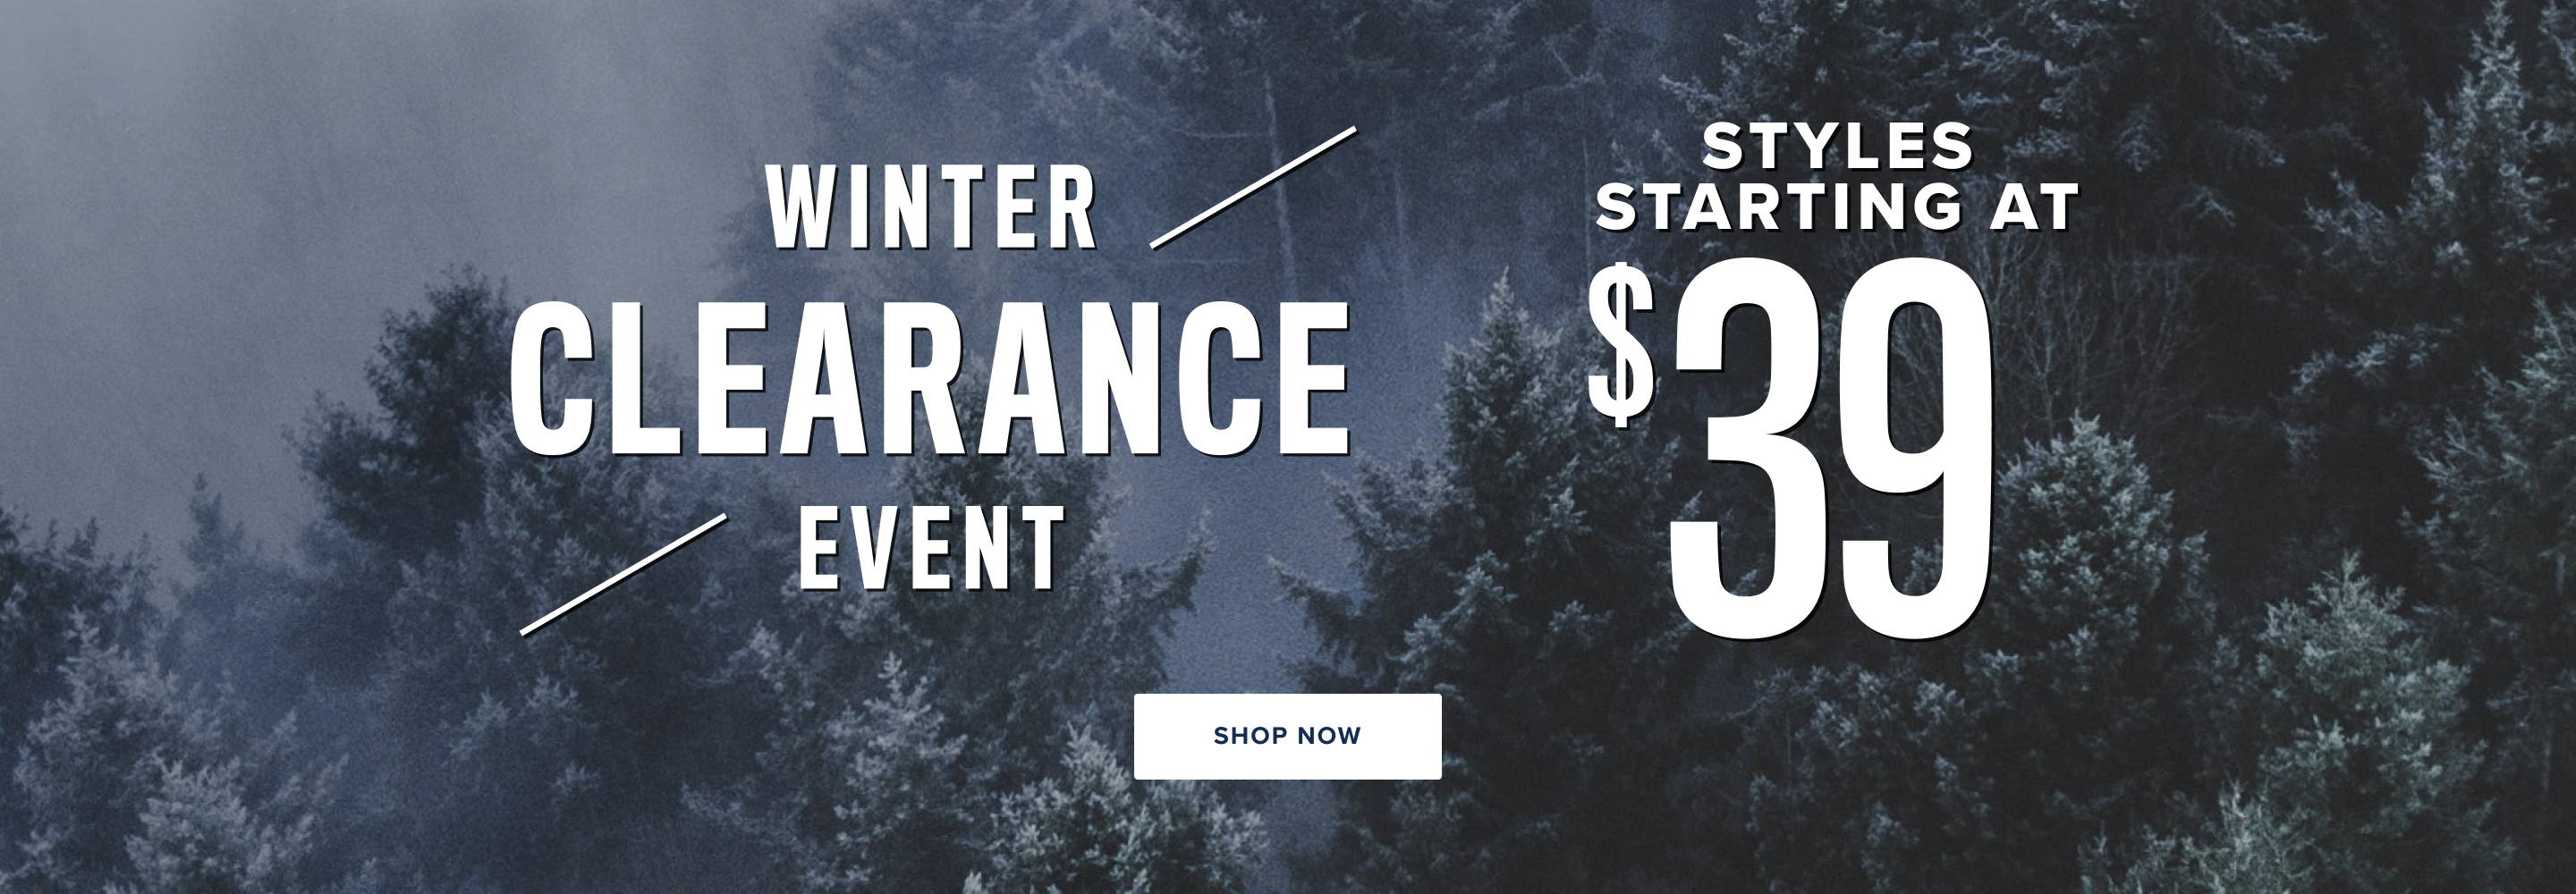 Winter Clearance Event Styles Starting at $39